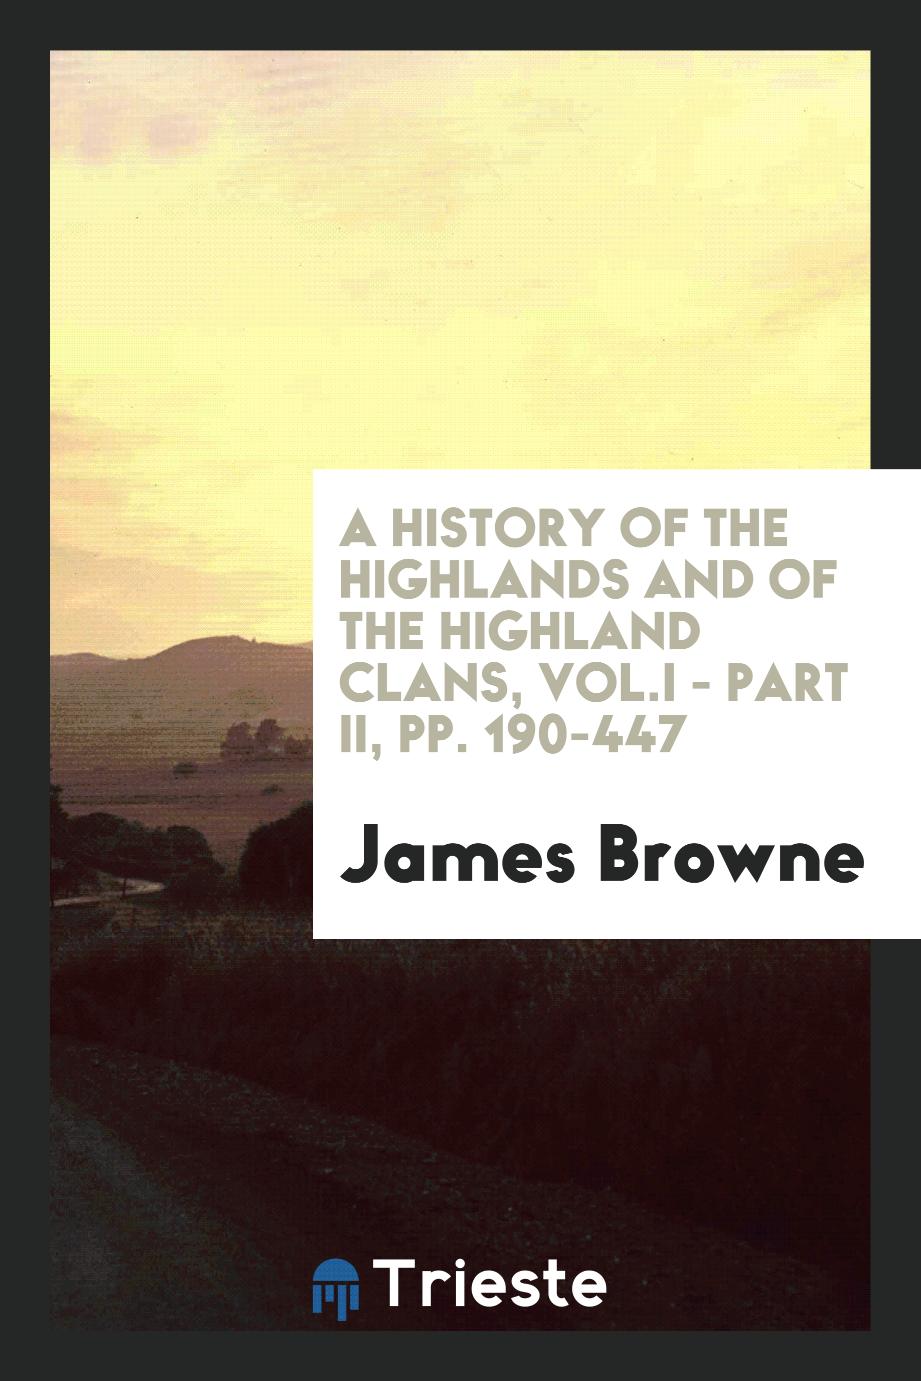 A History of the Highlands and of the Highland clans, Vol.I - Part II, pp. 190-447